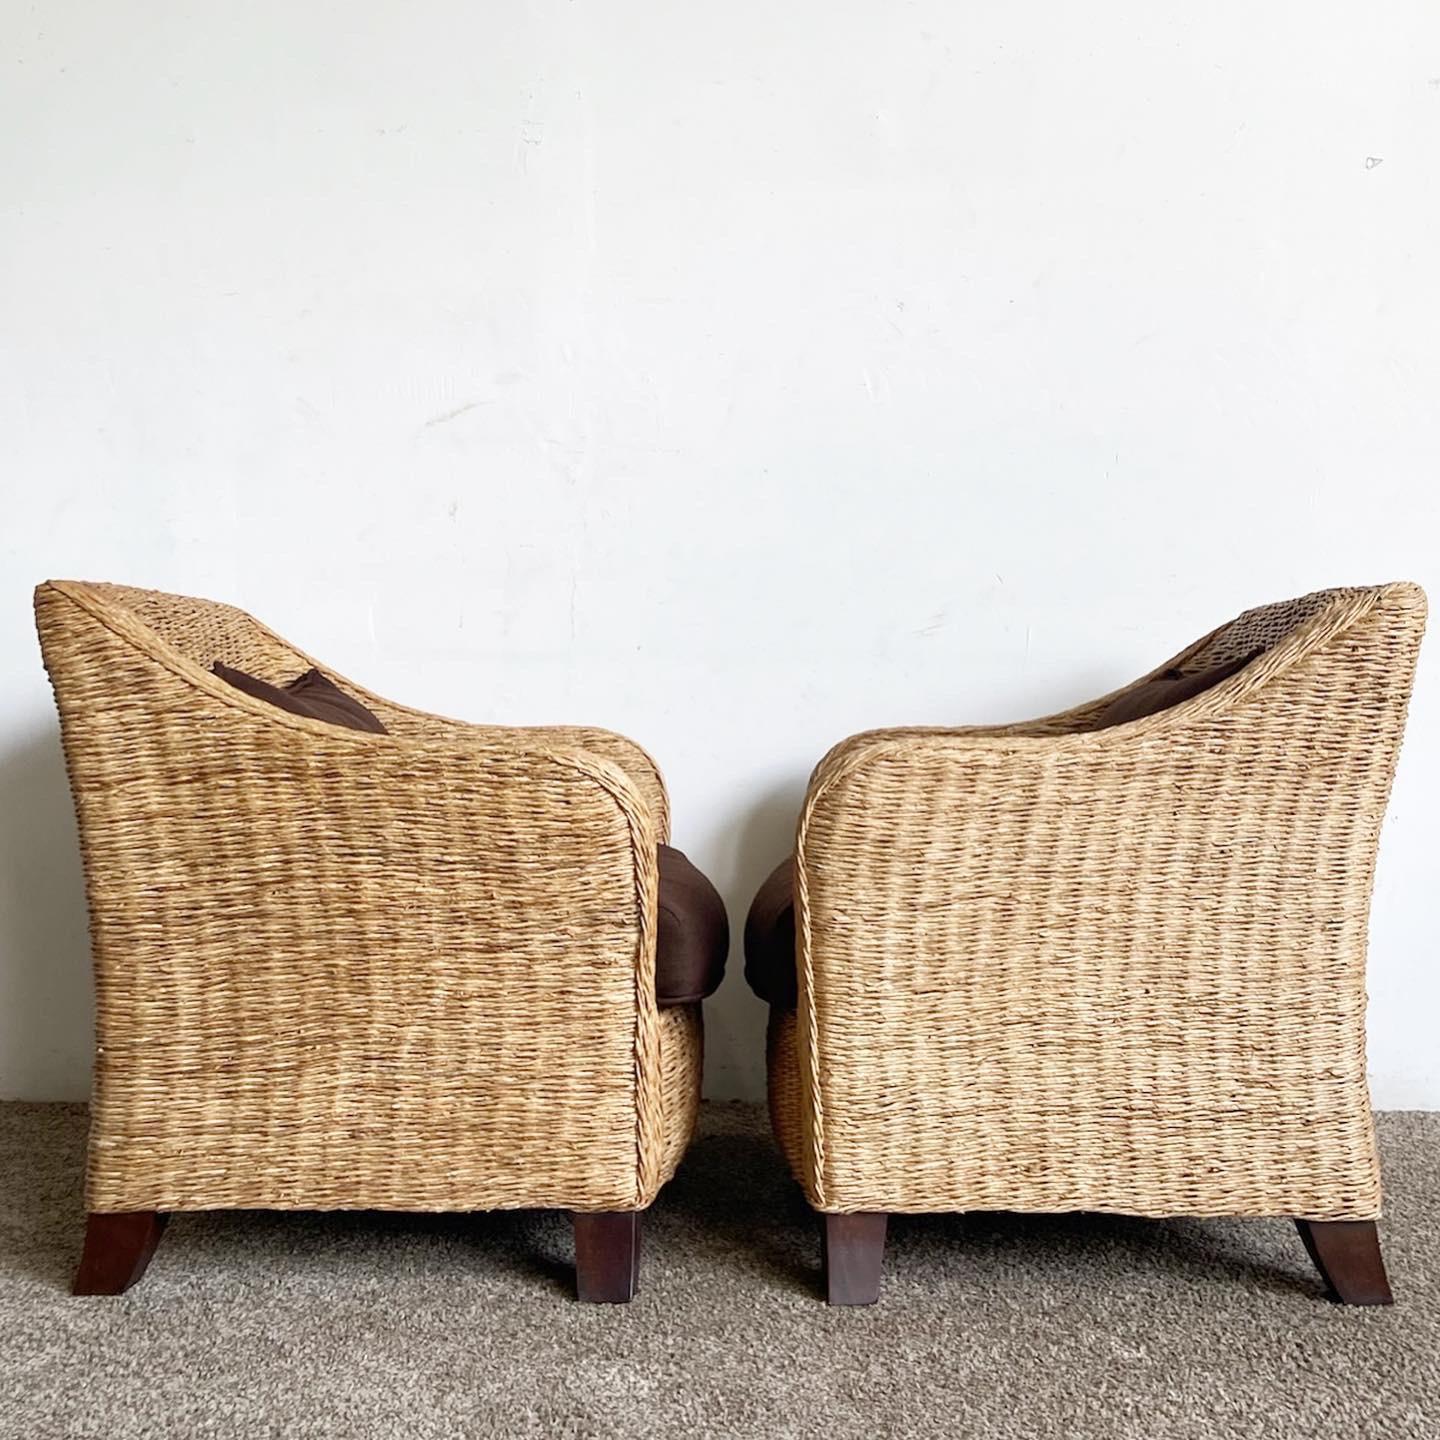 Boho Chic Wicker Arm Chairs With Brown Cushions For Sale 3